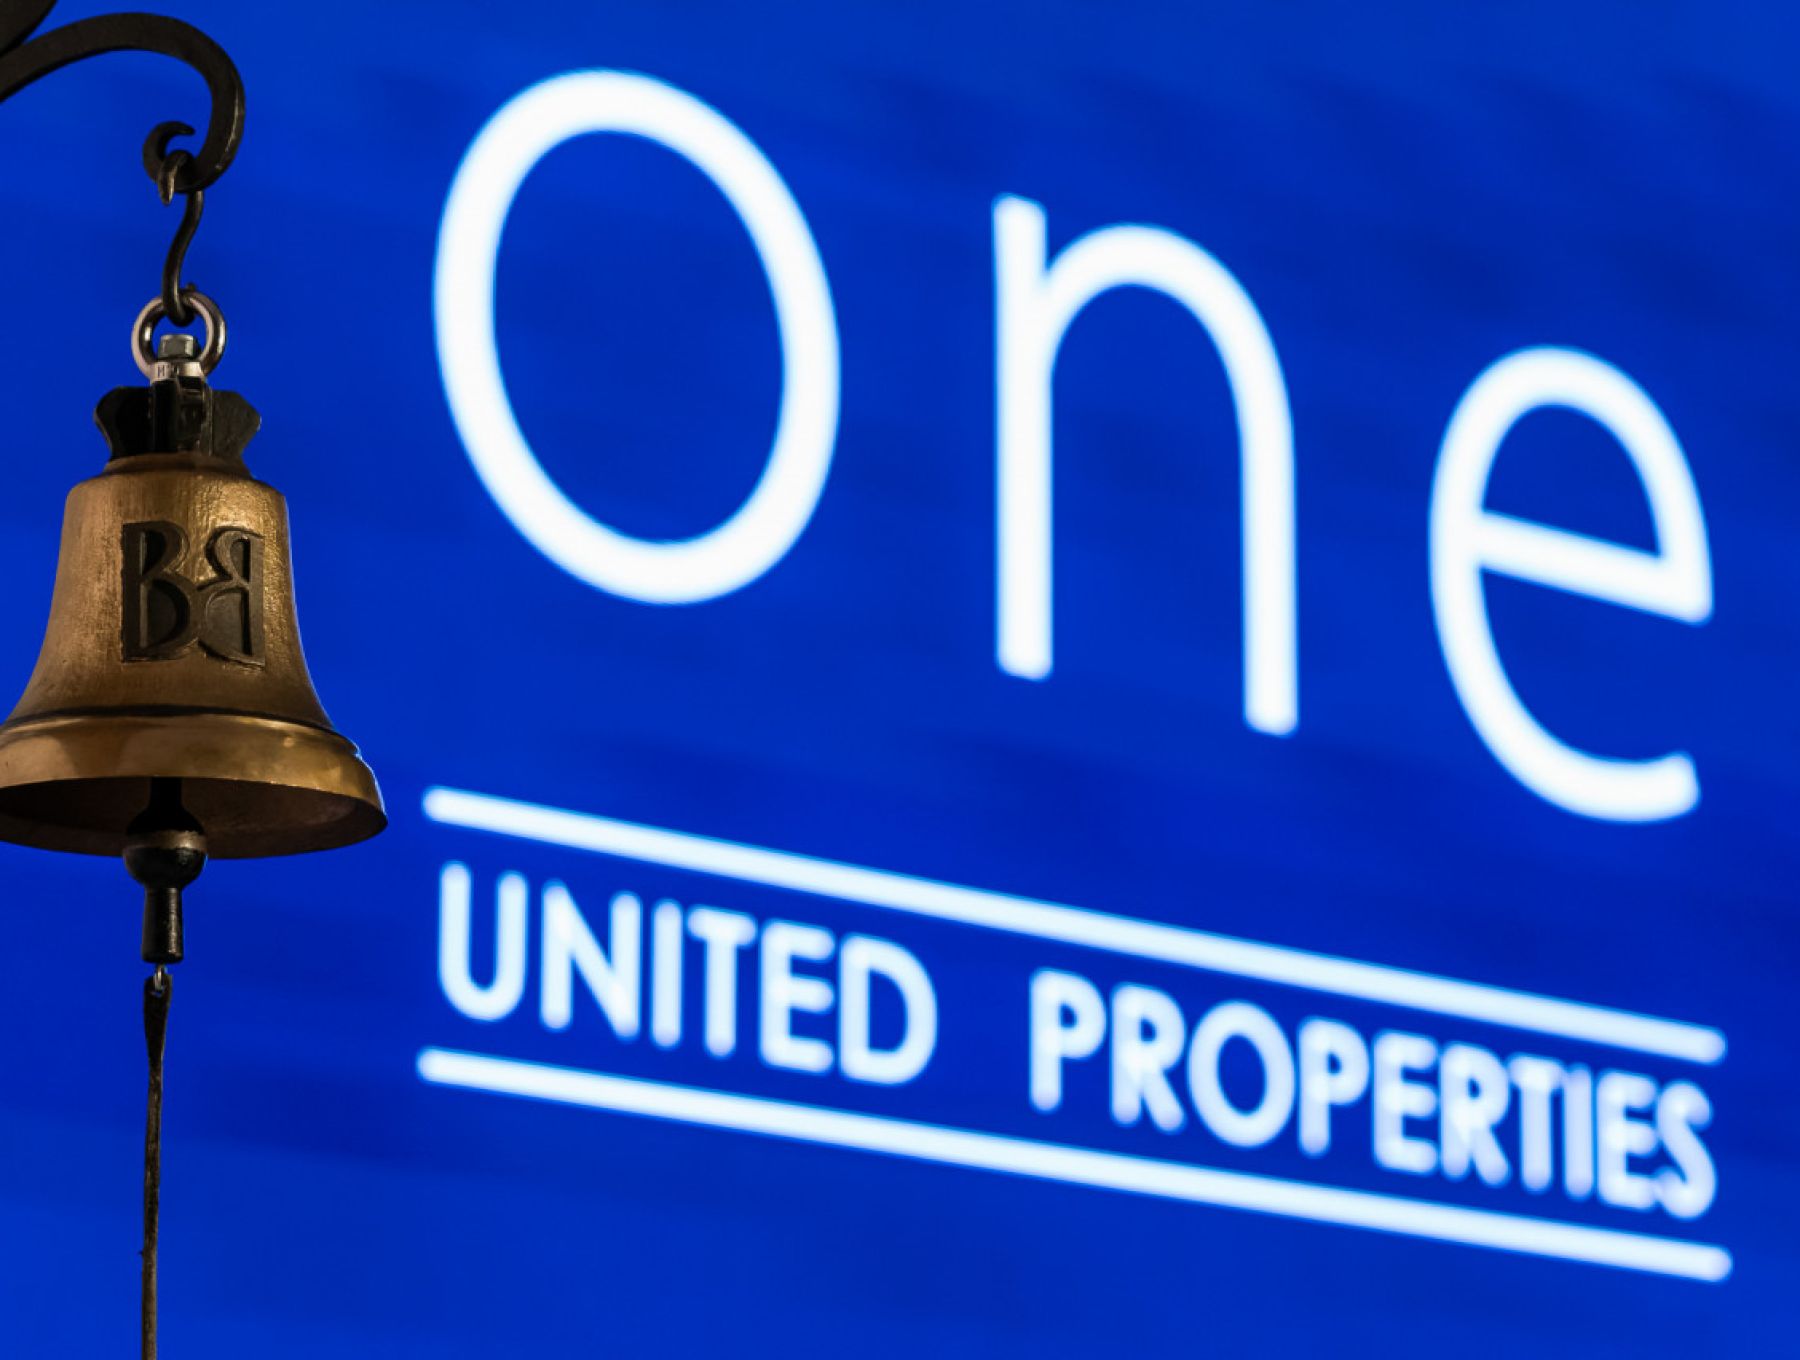 One United Properties shares enter the BET Index